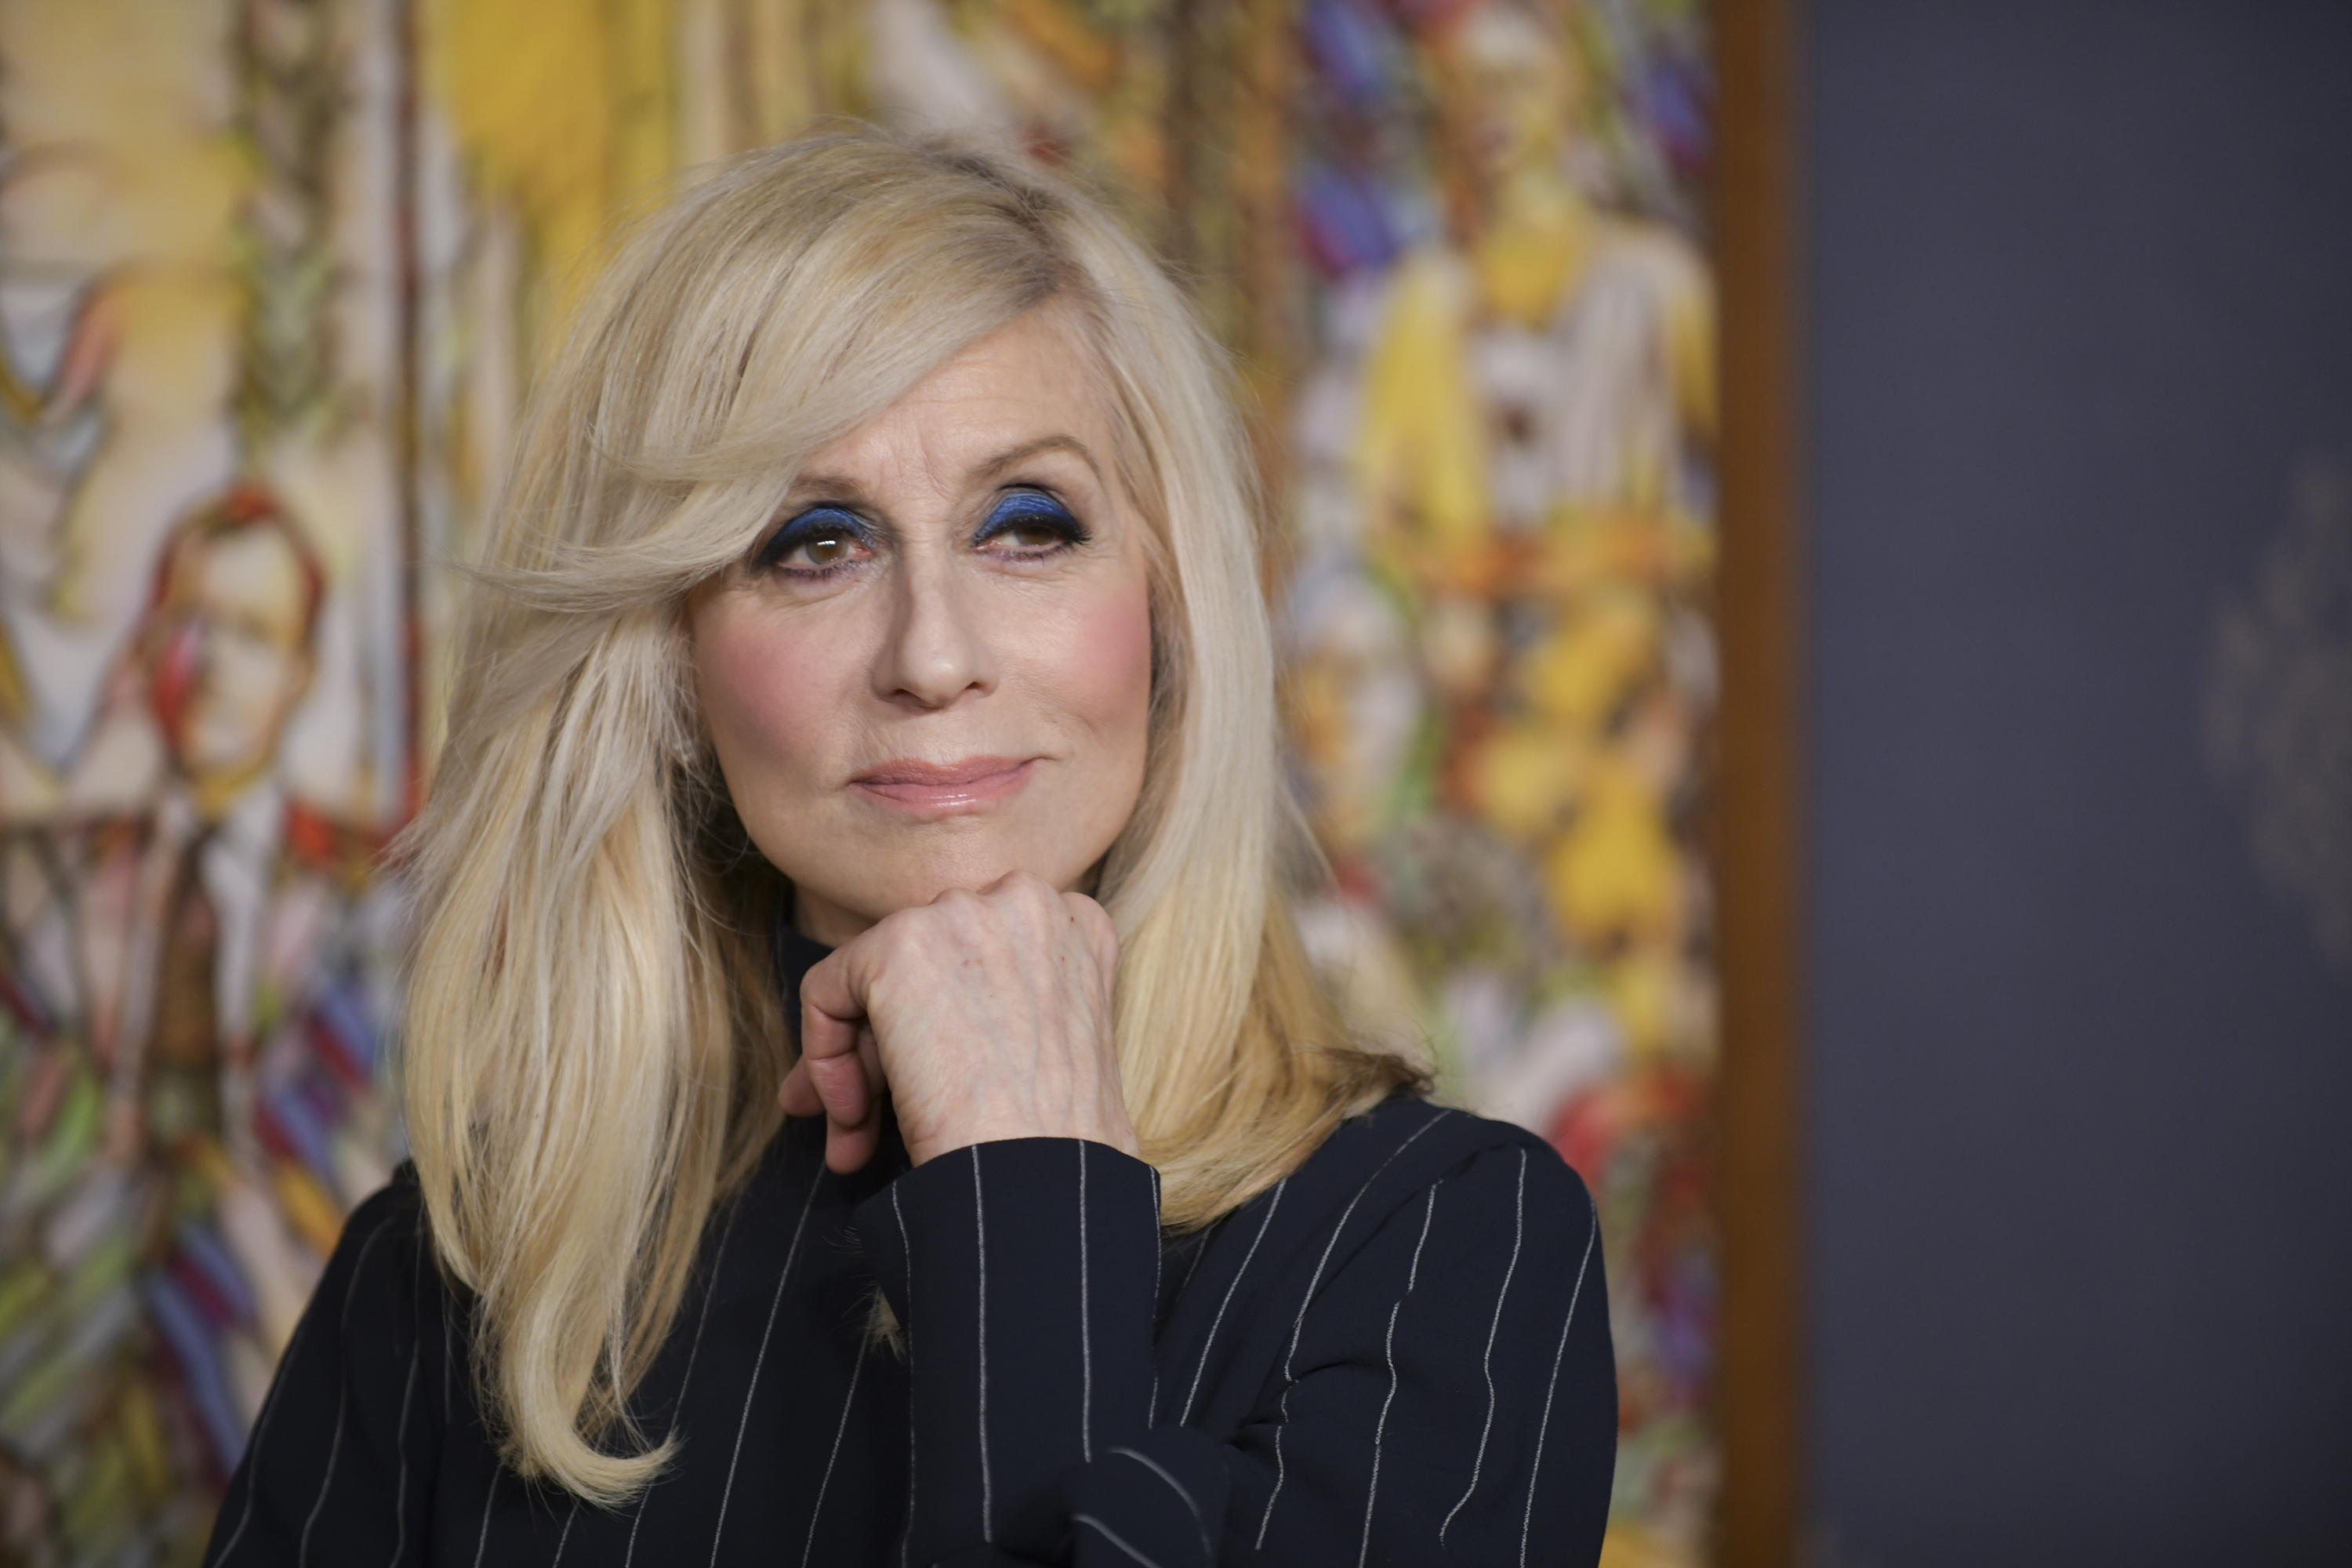 Judith Light at the premiere of STARZ's "Shining Vale" in Los Angeles in 2022 | Source: Getty Images